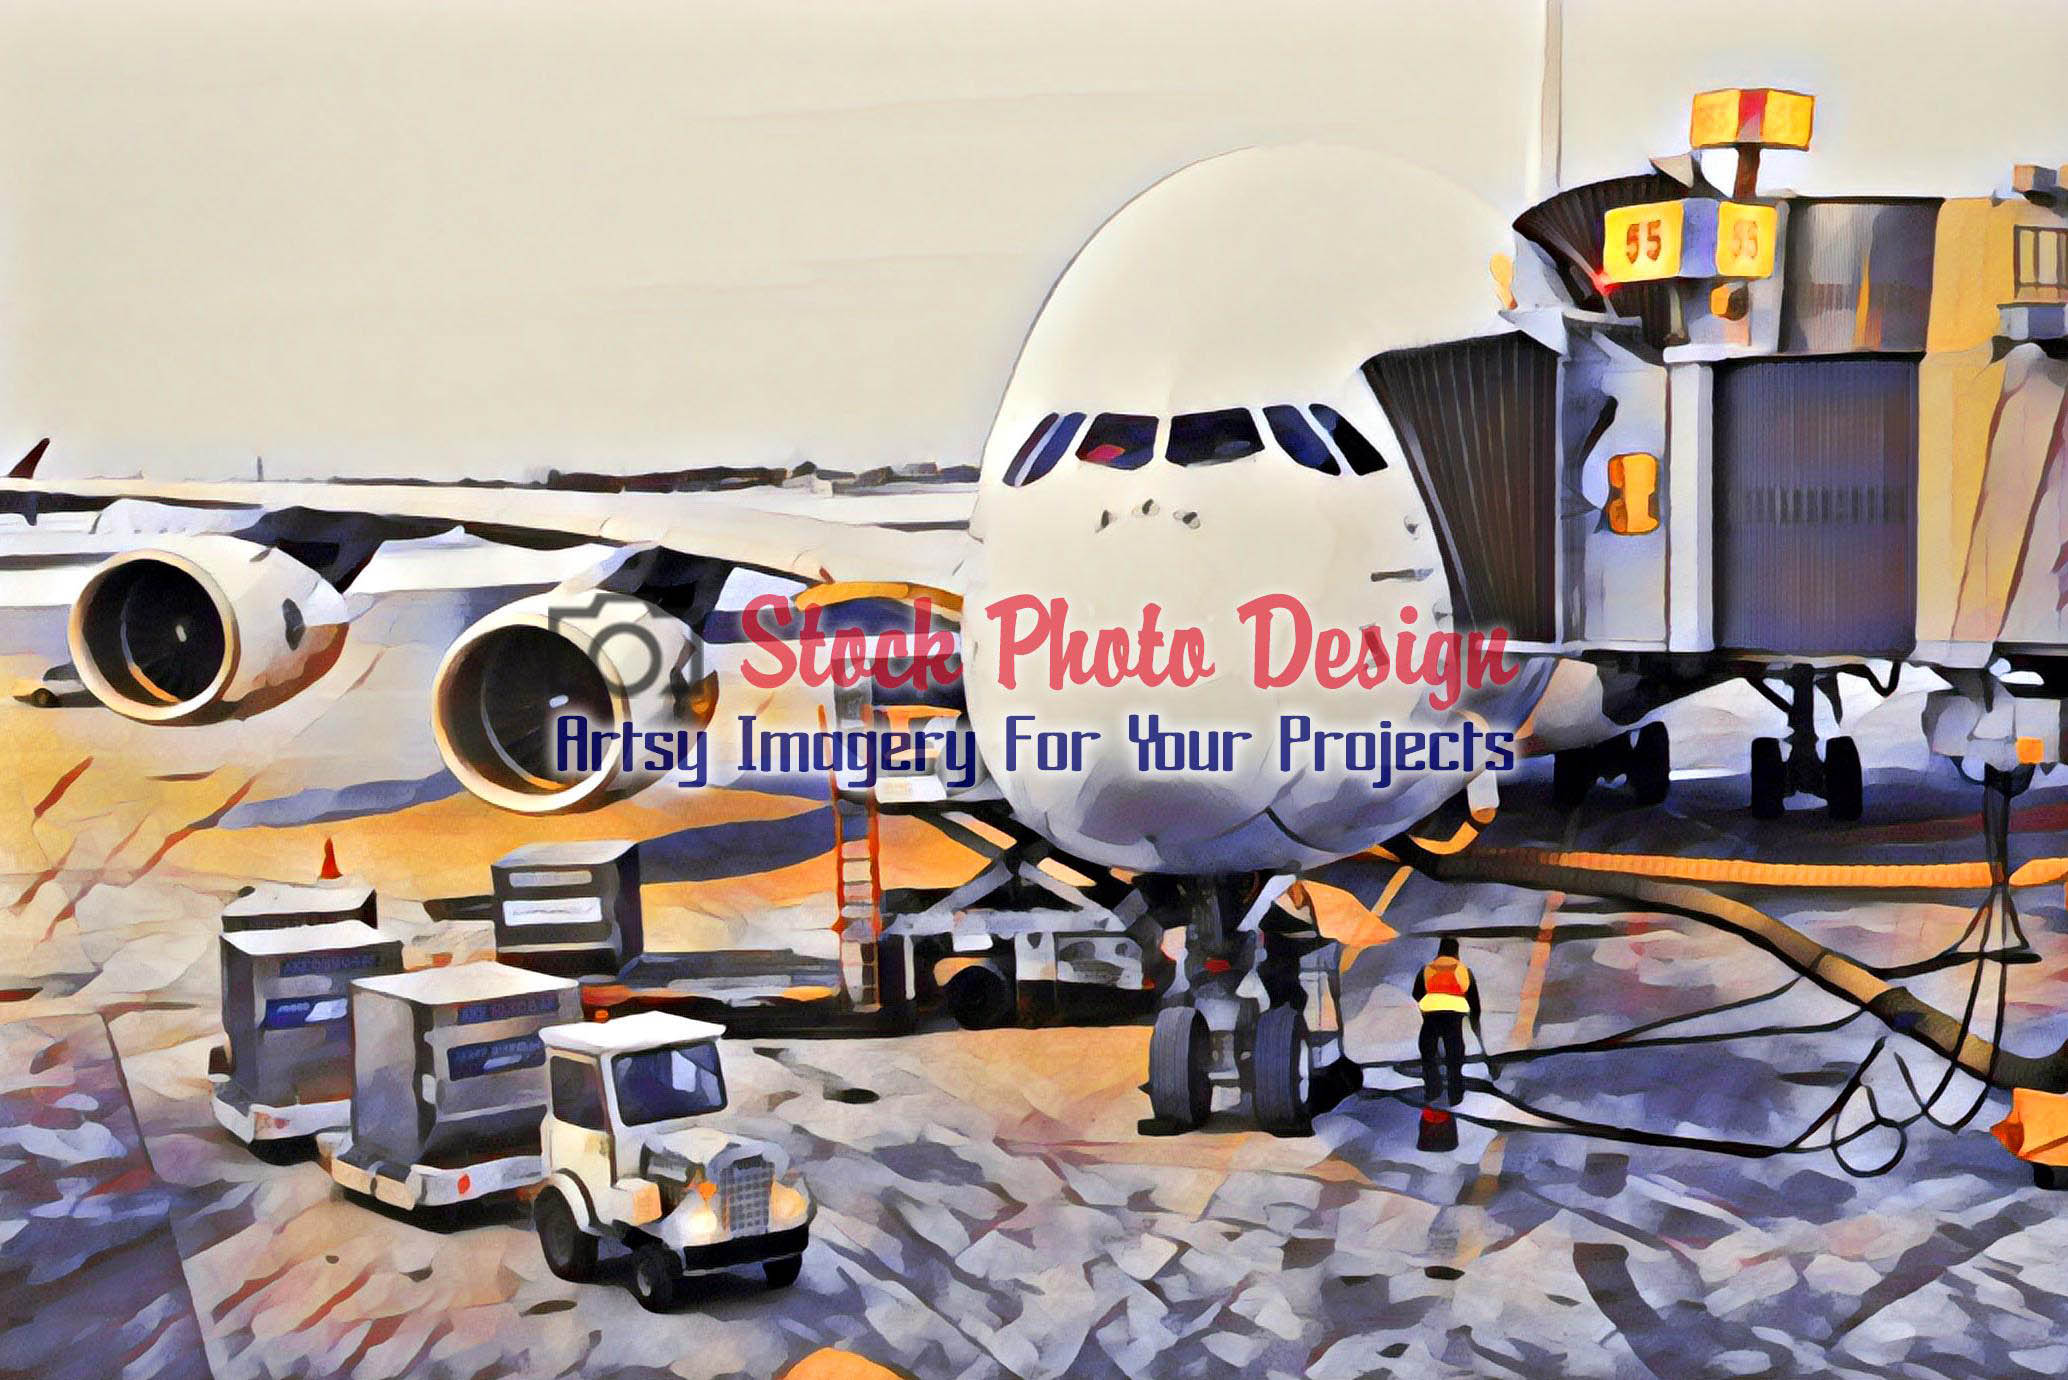 Large Airplane at the Airport 2 - Dimensions: 2068 by 1380 pixels